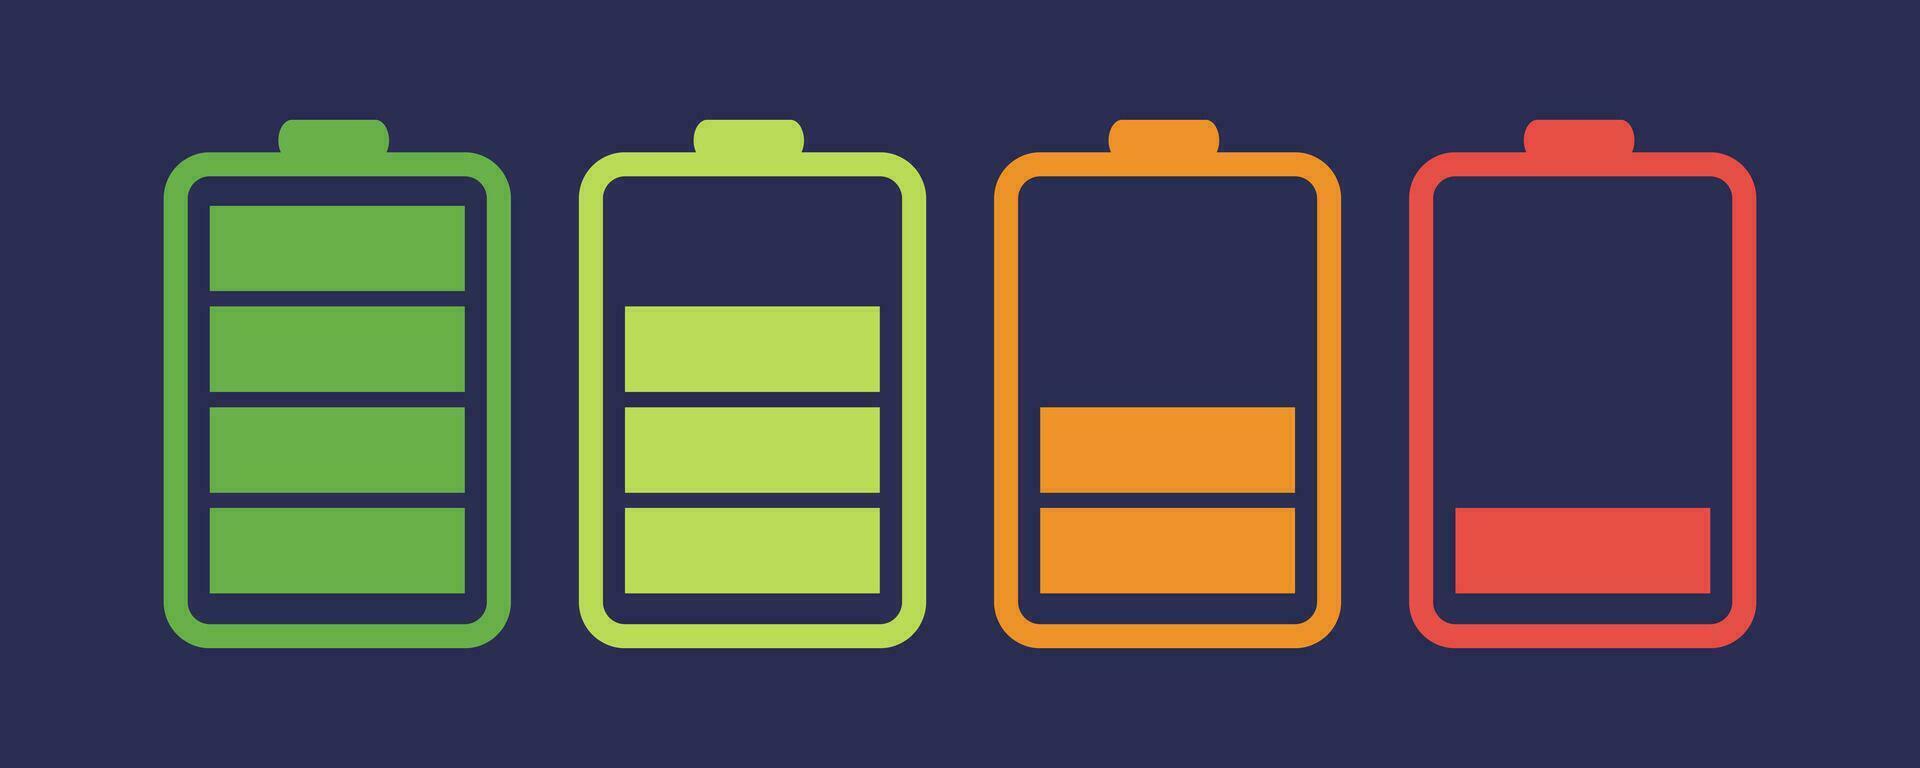 A set of colorful battery charge level indicators in vector format, designed against a dark background.